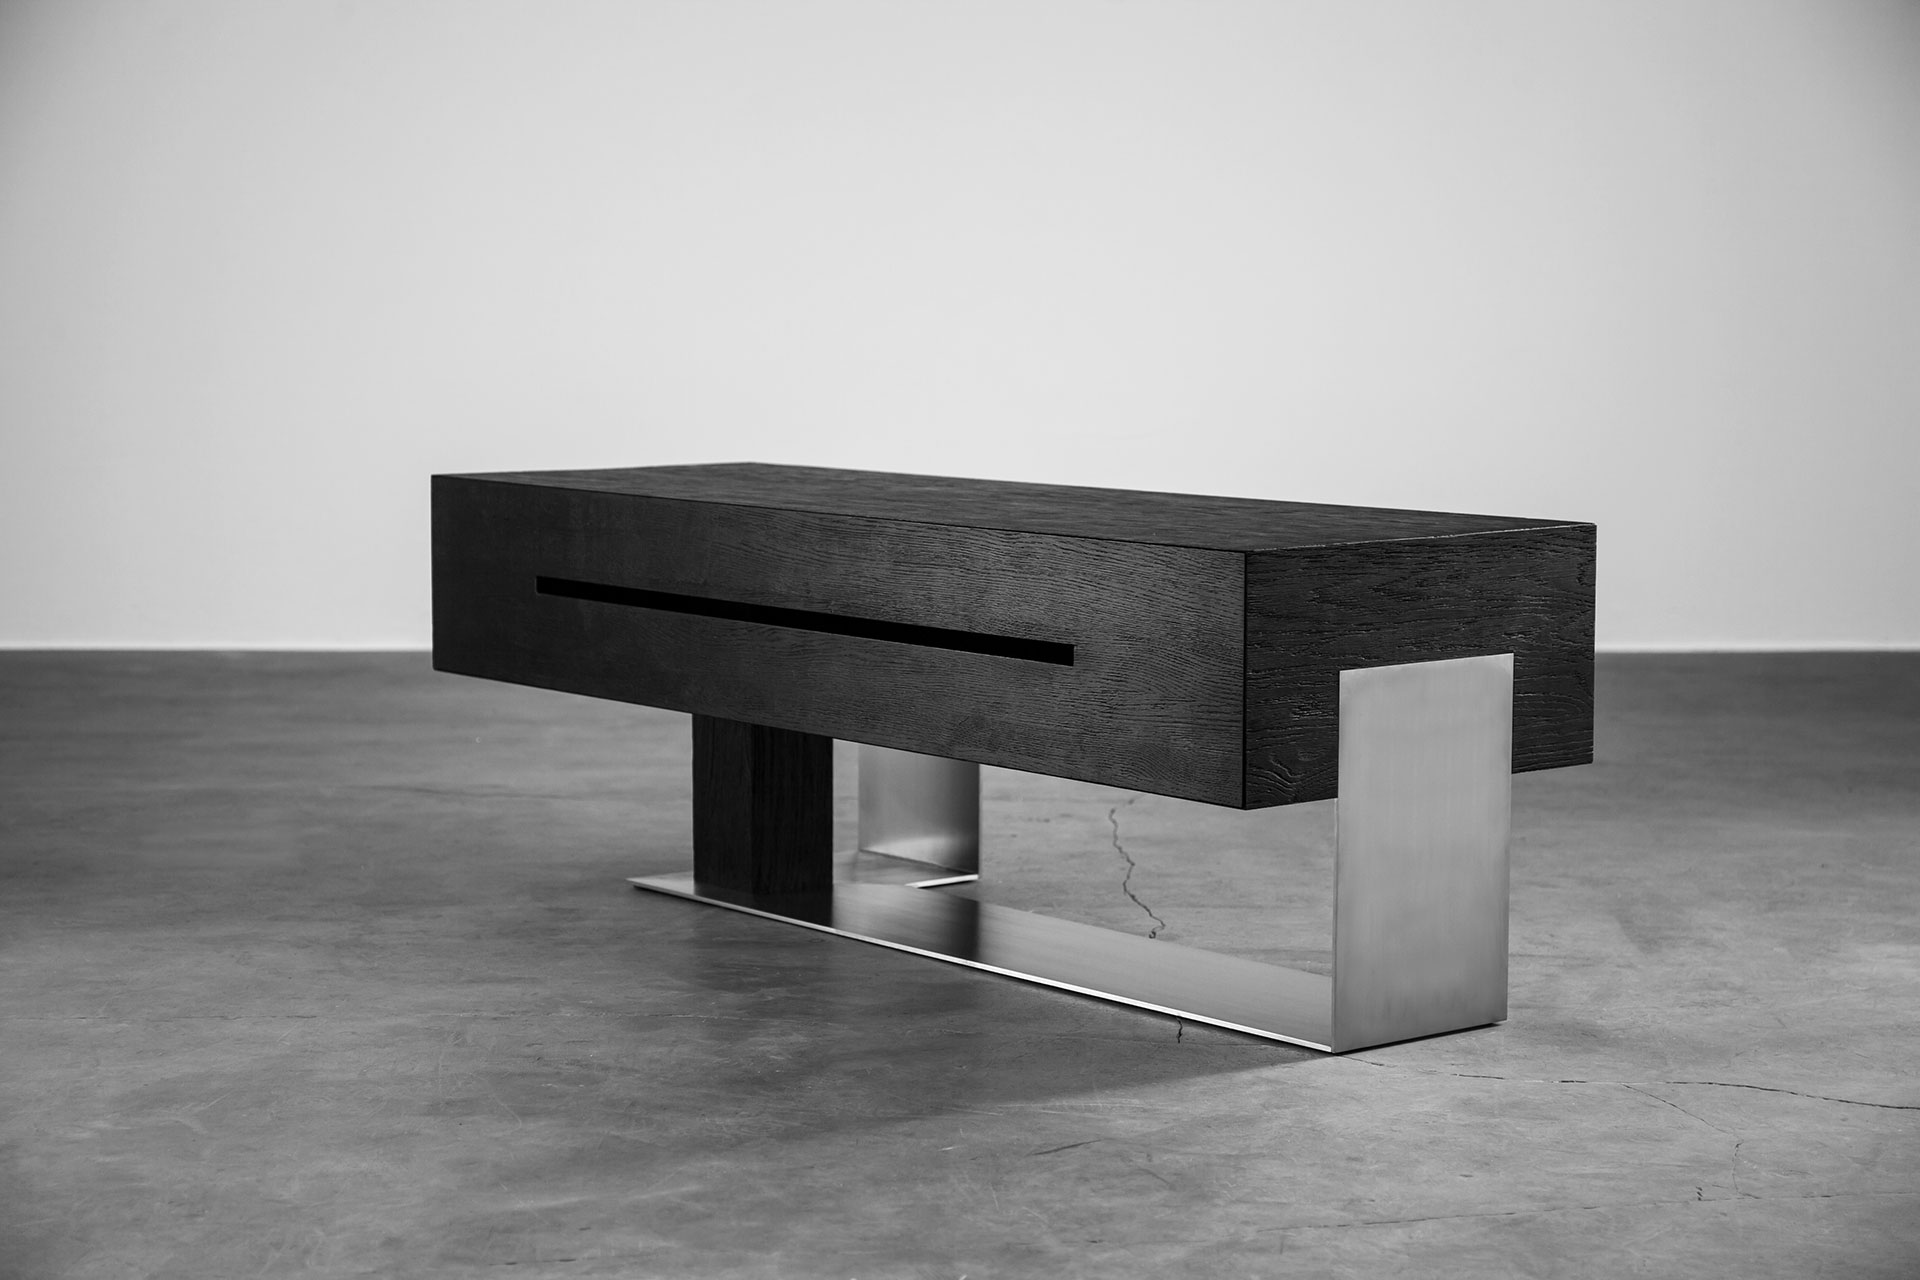 Contemporary media console inspired by brutalism style